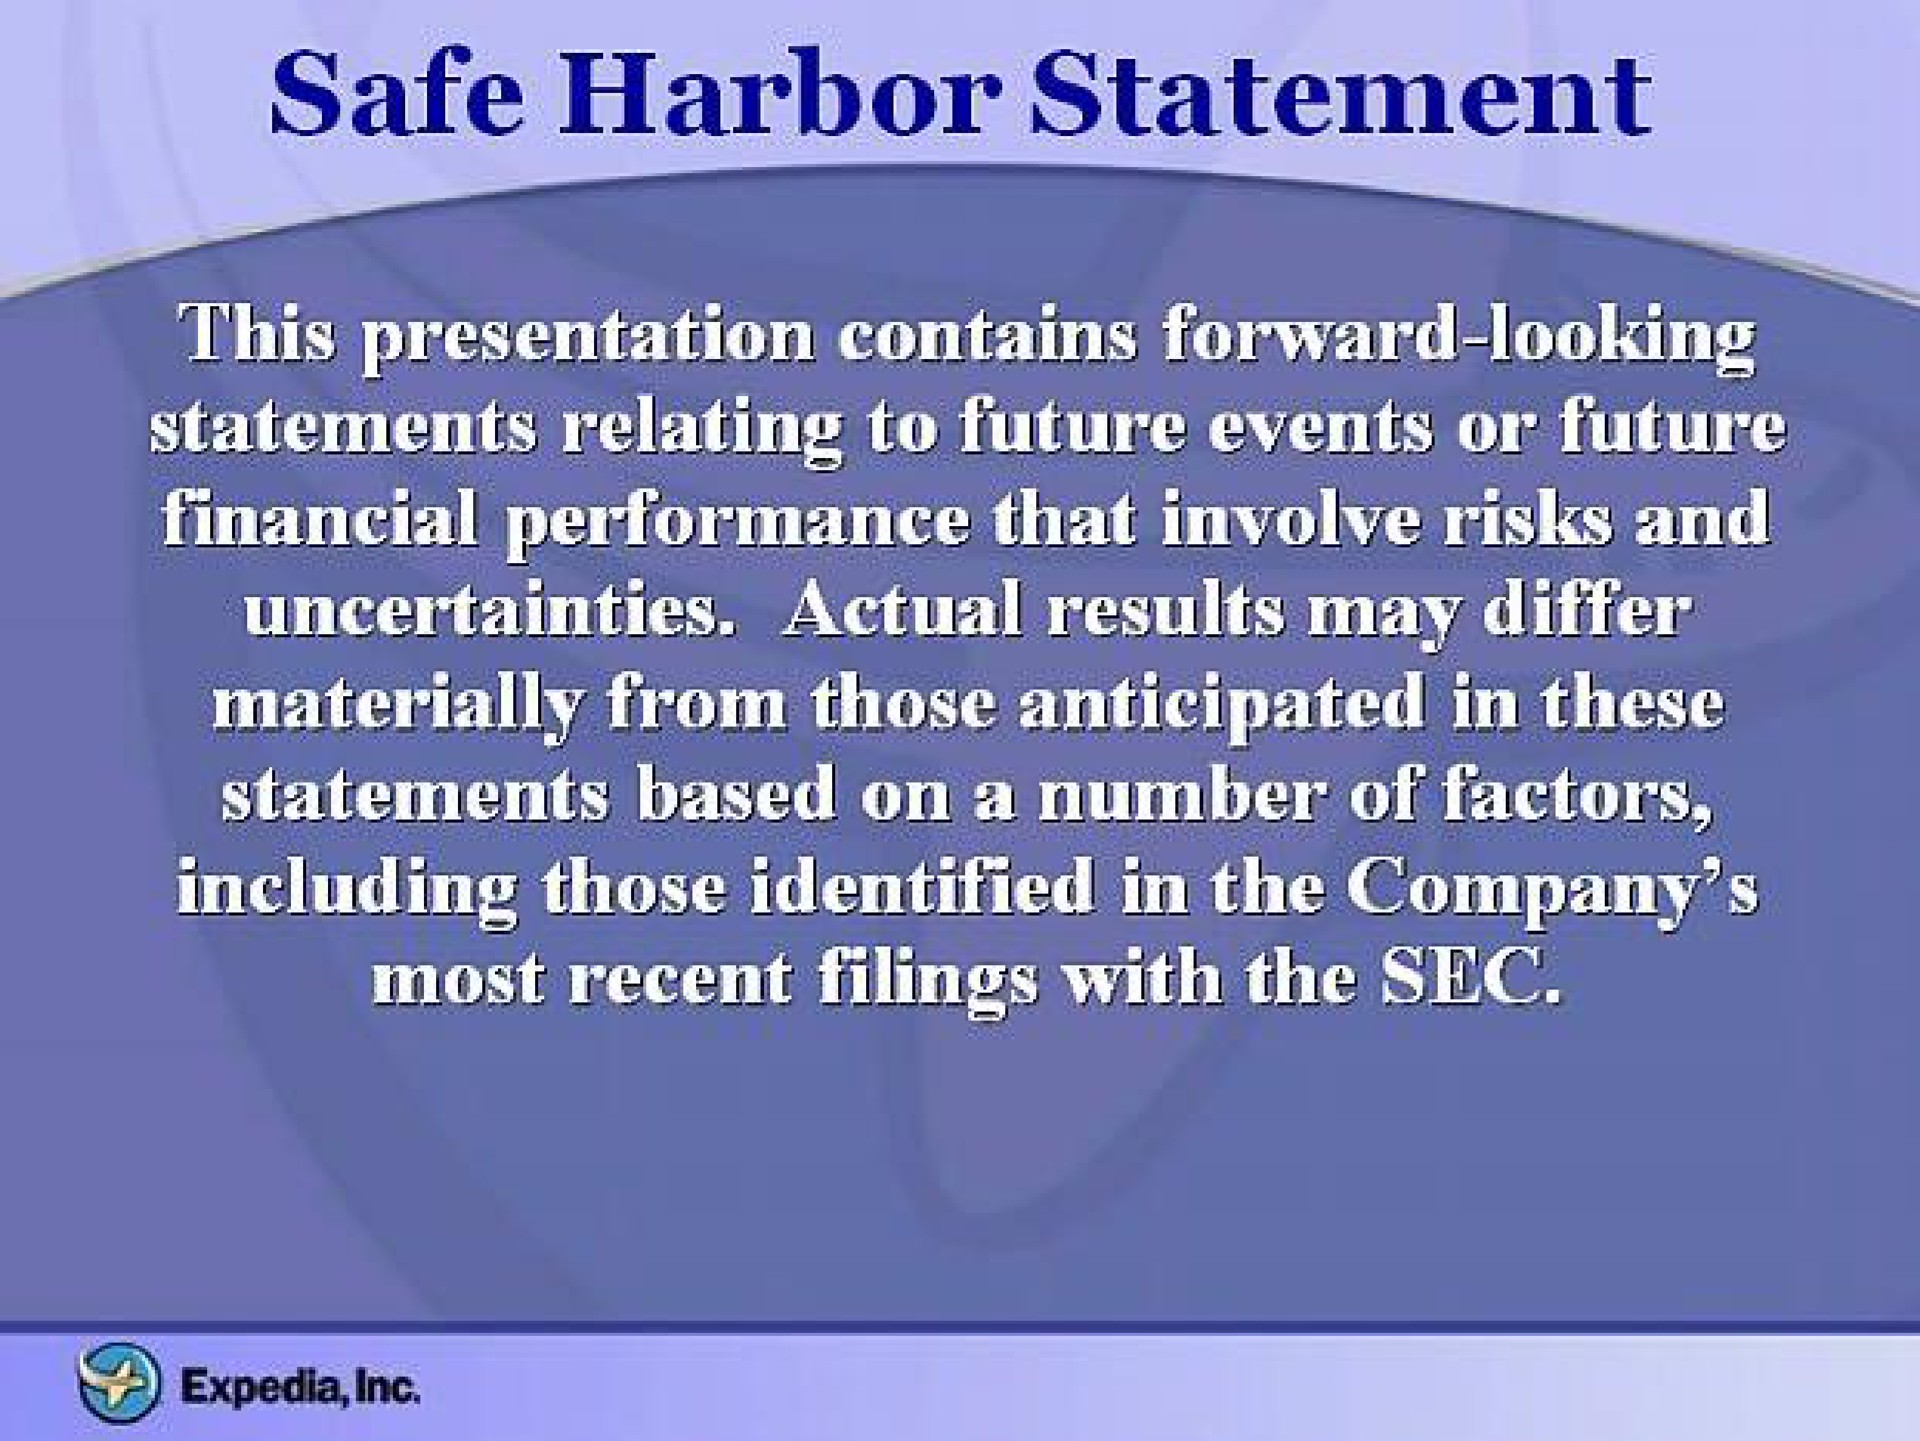 safe harbor statement this presentation contains forward looking statements relating to future events or future financial performance that involve risks and ties a materially from those anticipated in these statements based on a number of factors including those identified in the company most recent filings with the sec | Expedia